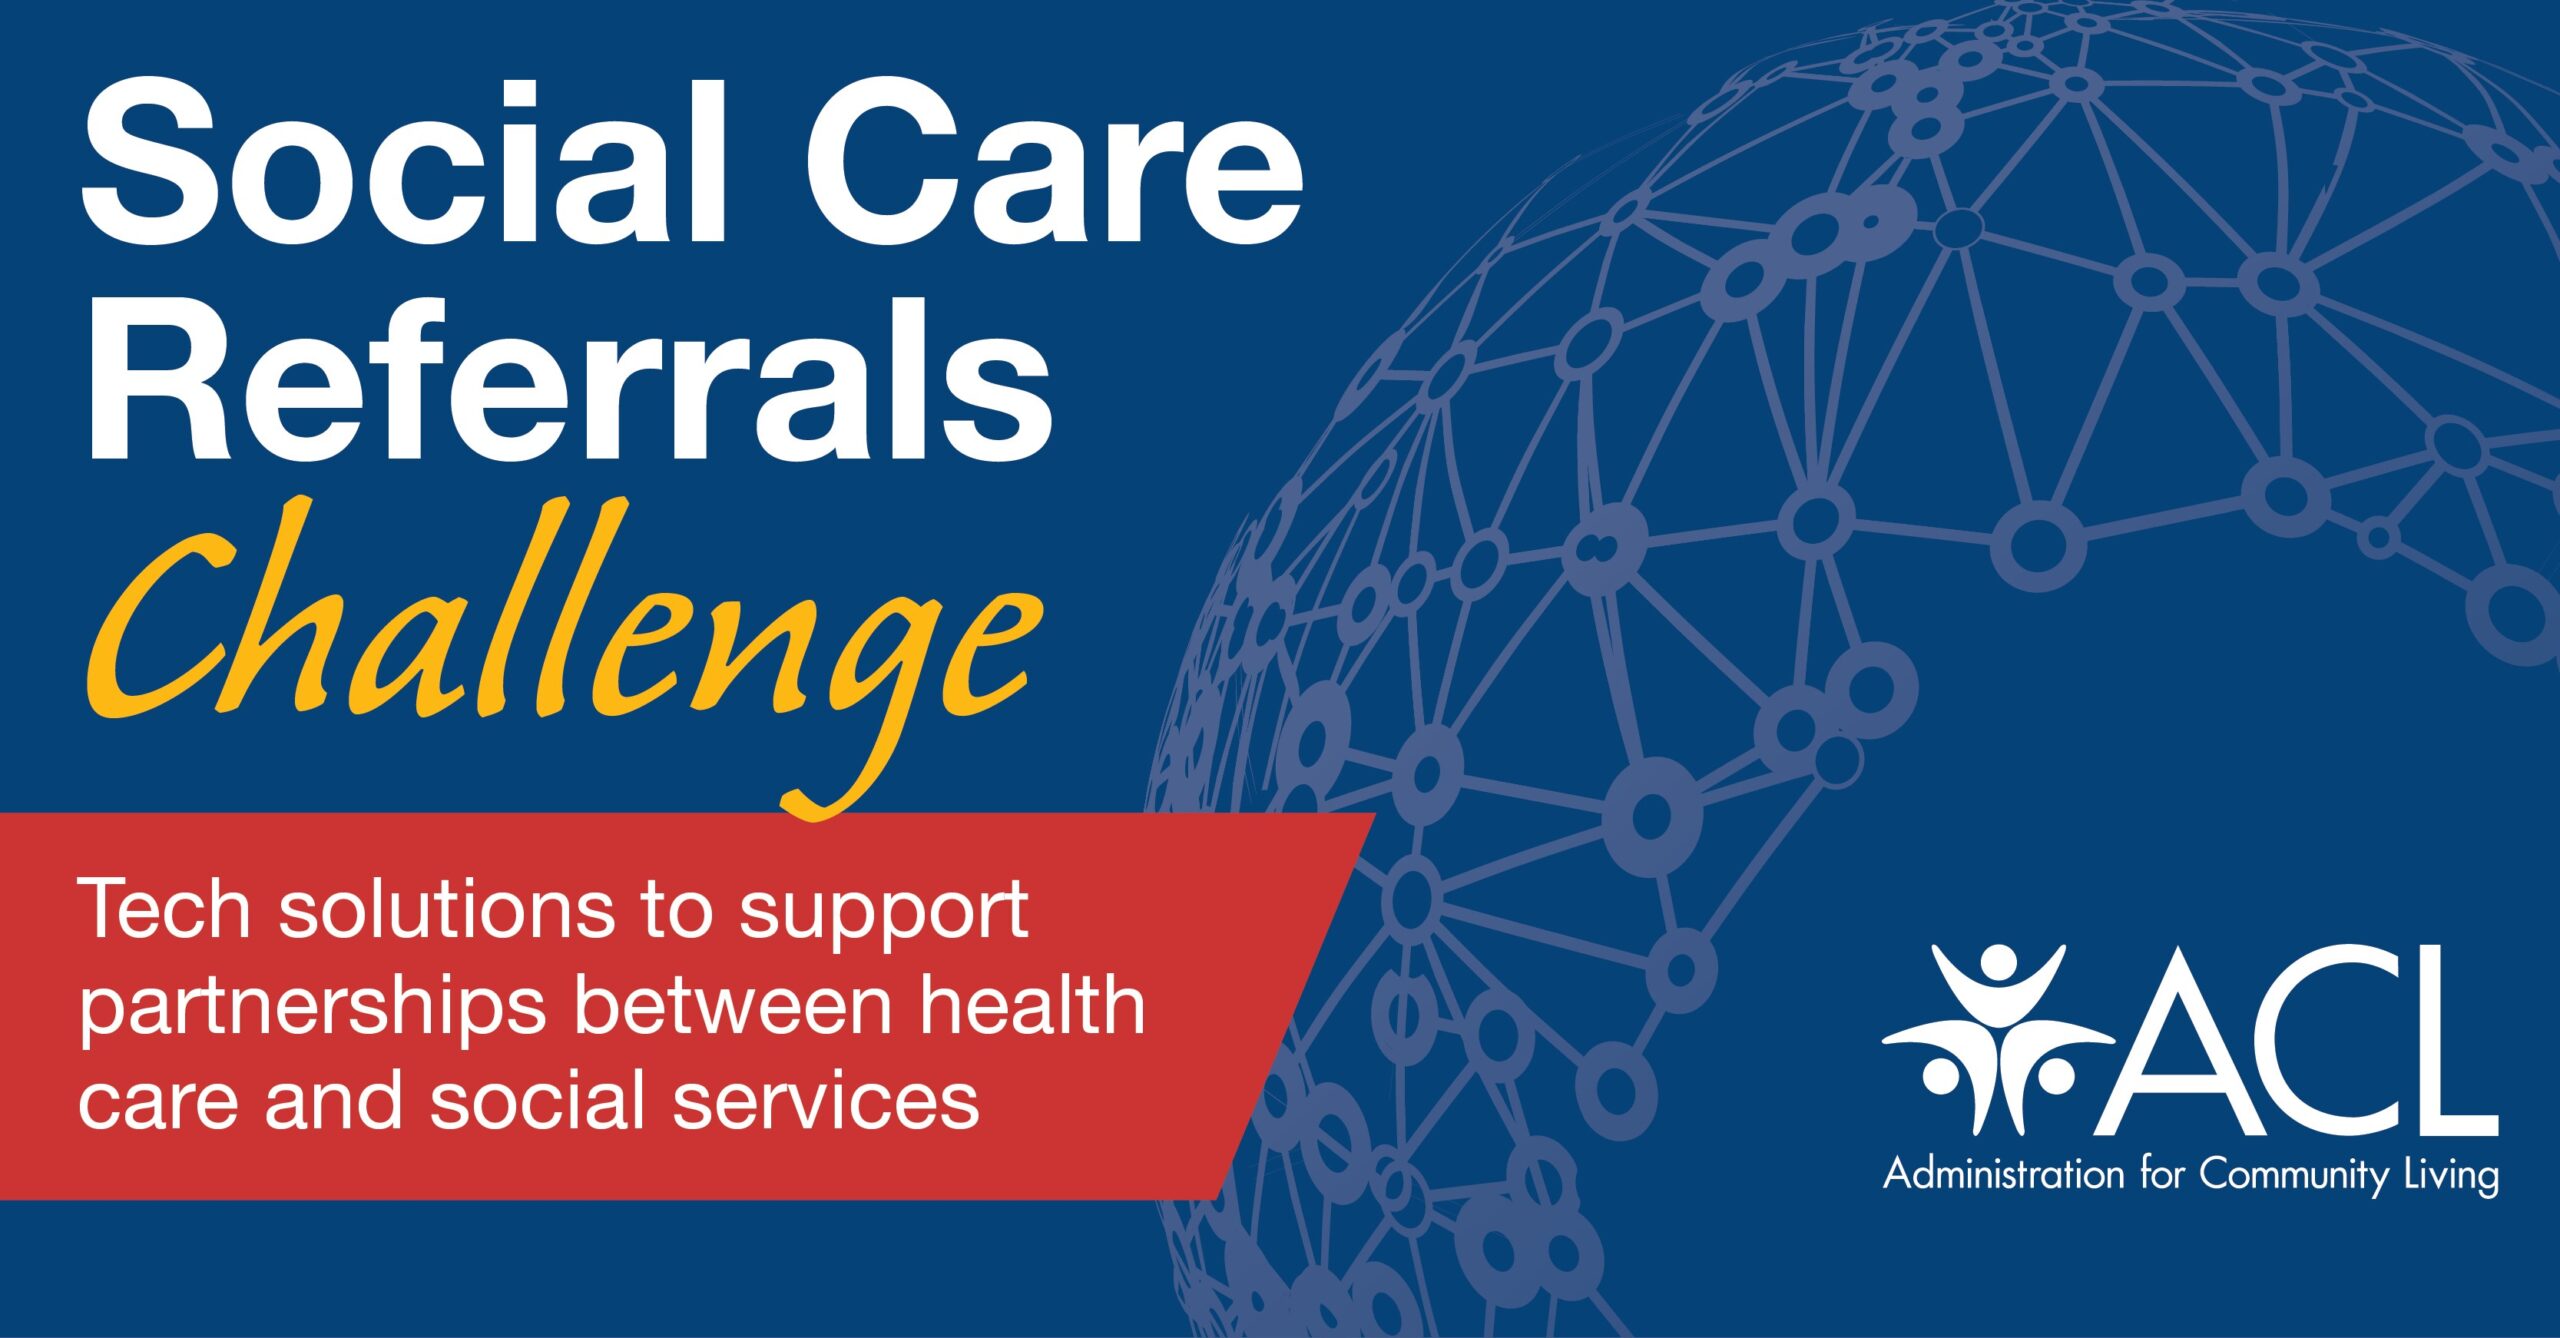 The Administration for Community Living's Social Care Referrals Challenge